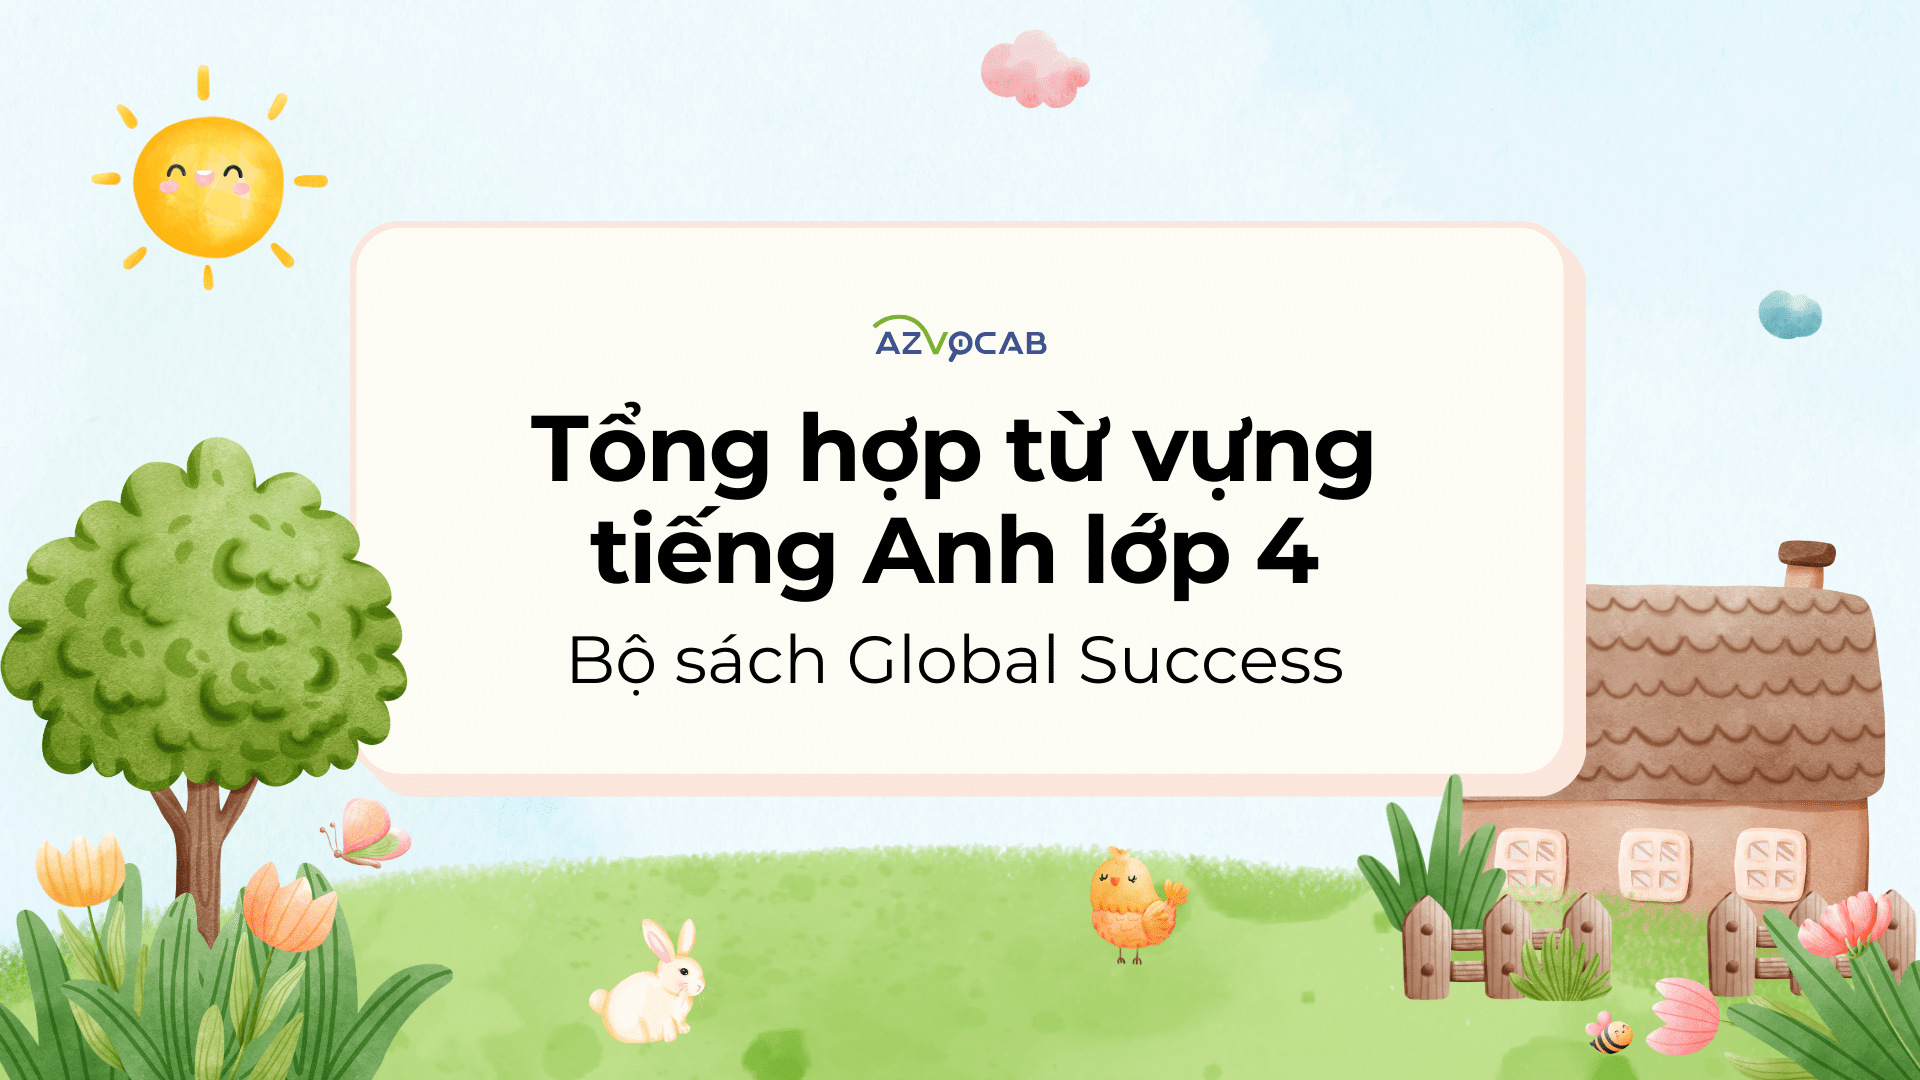 Tiếng Anh lớp 4 Global Success